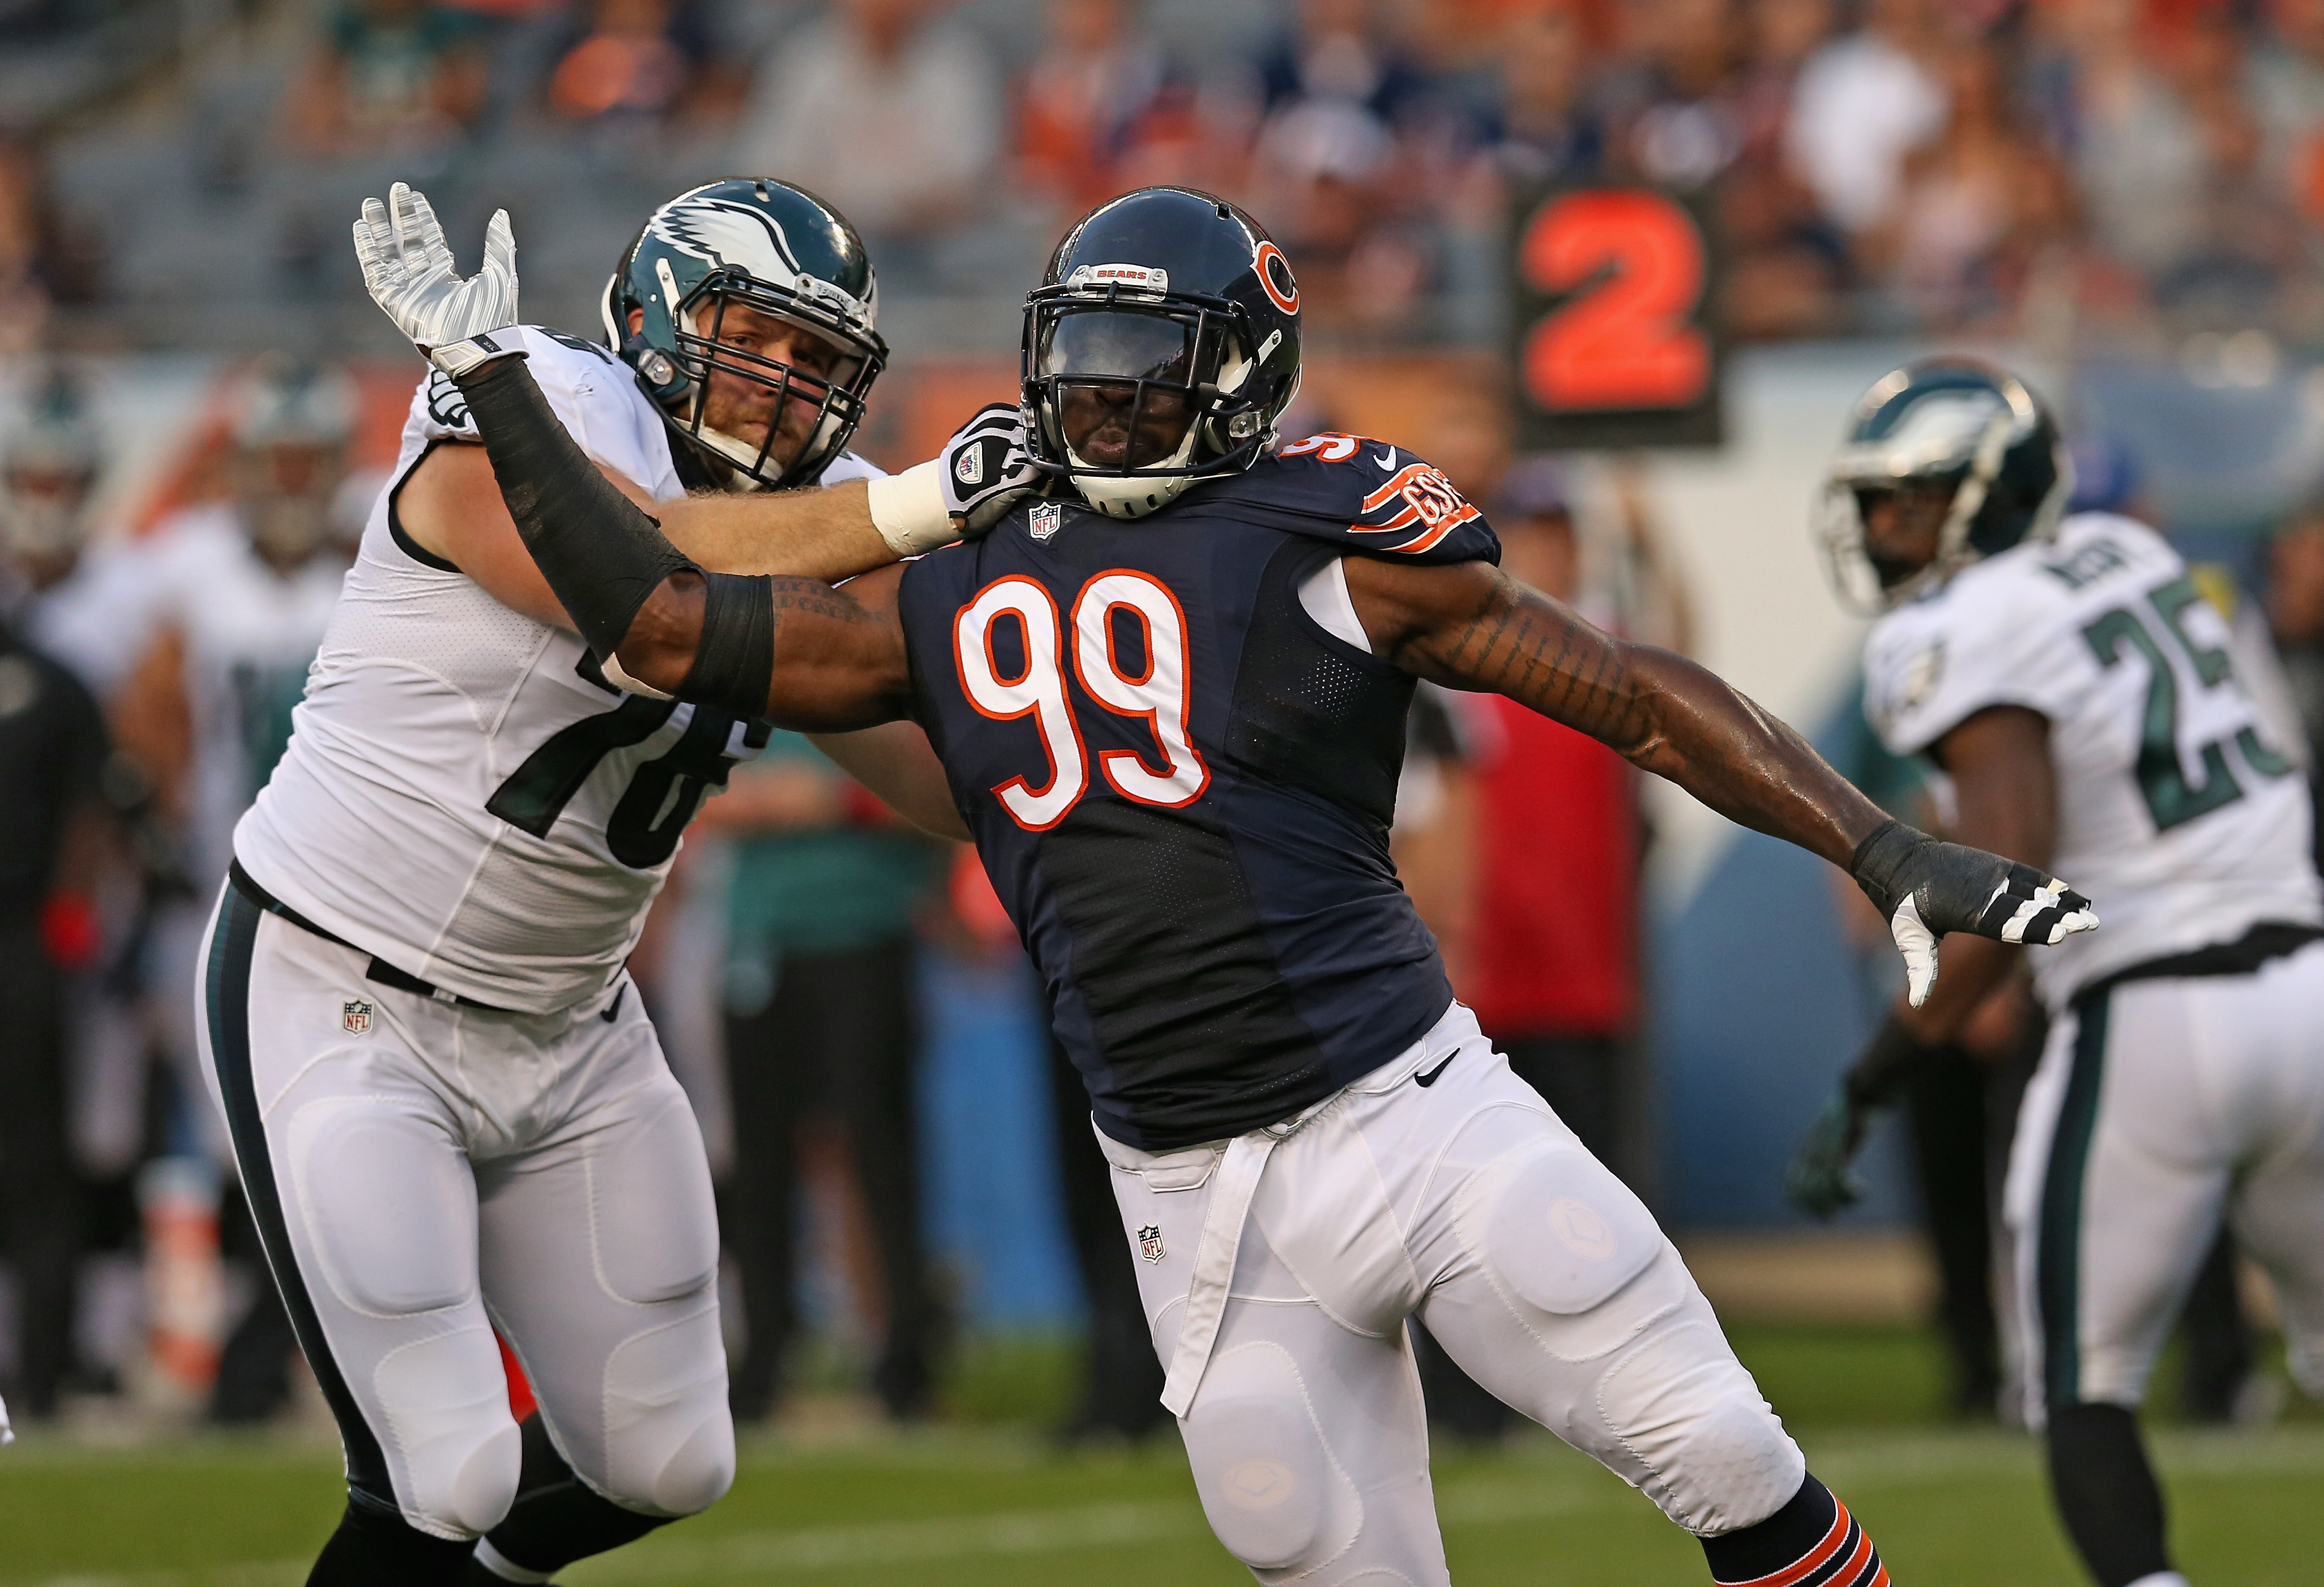 Lamarr Houston Made a Grievous Error Celebrating a Sack and He Never Lived It Down